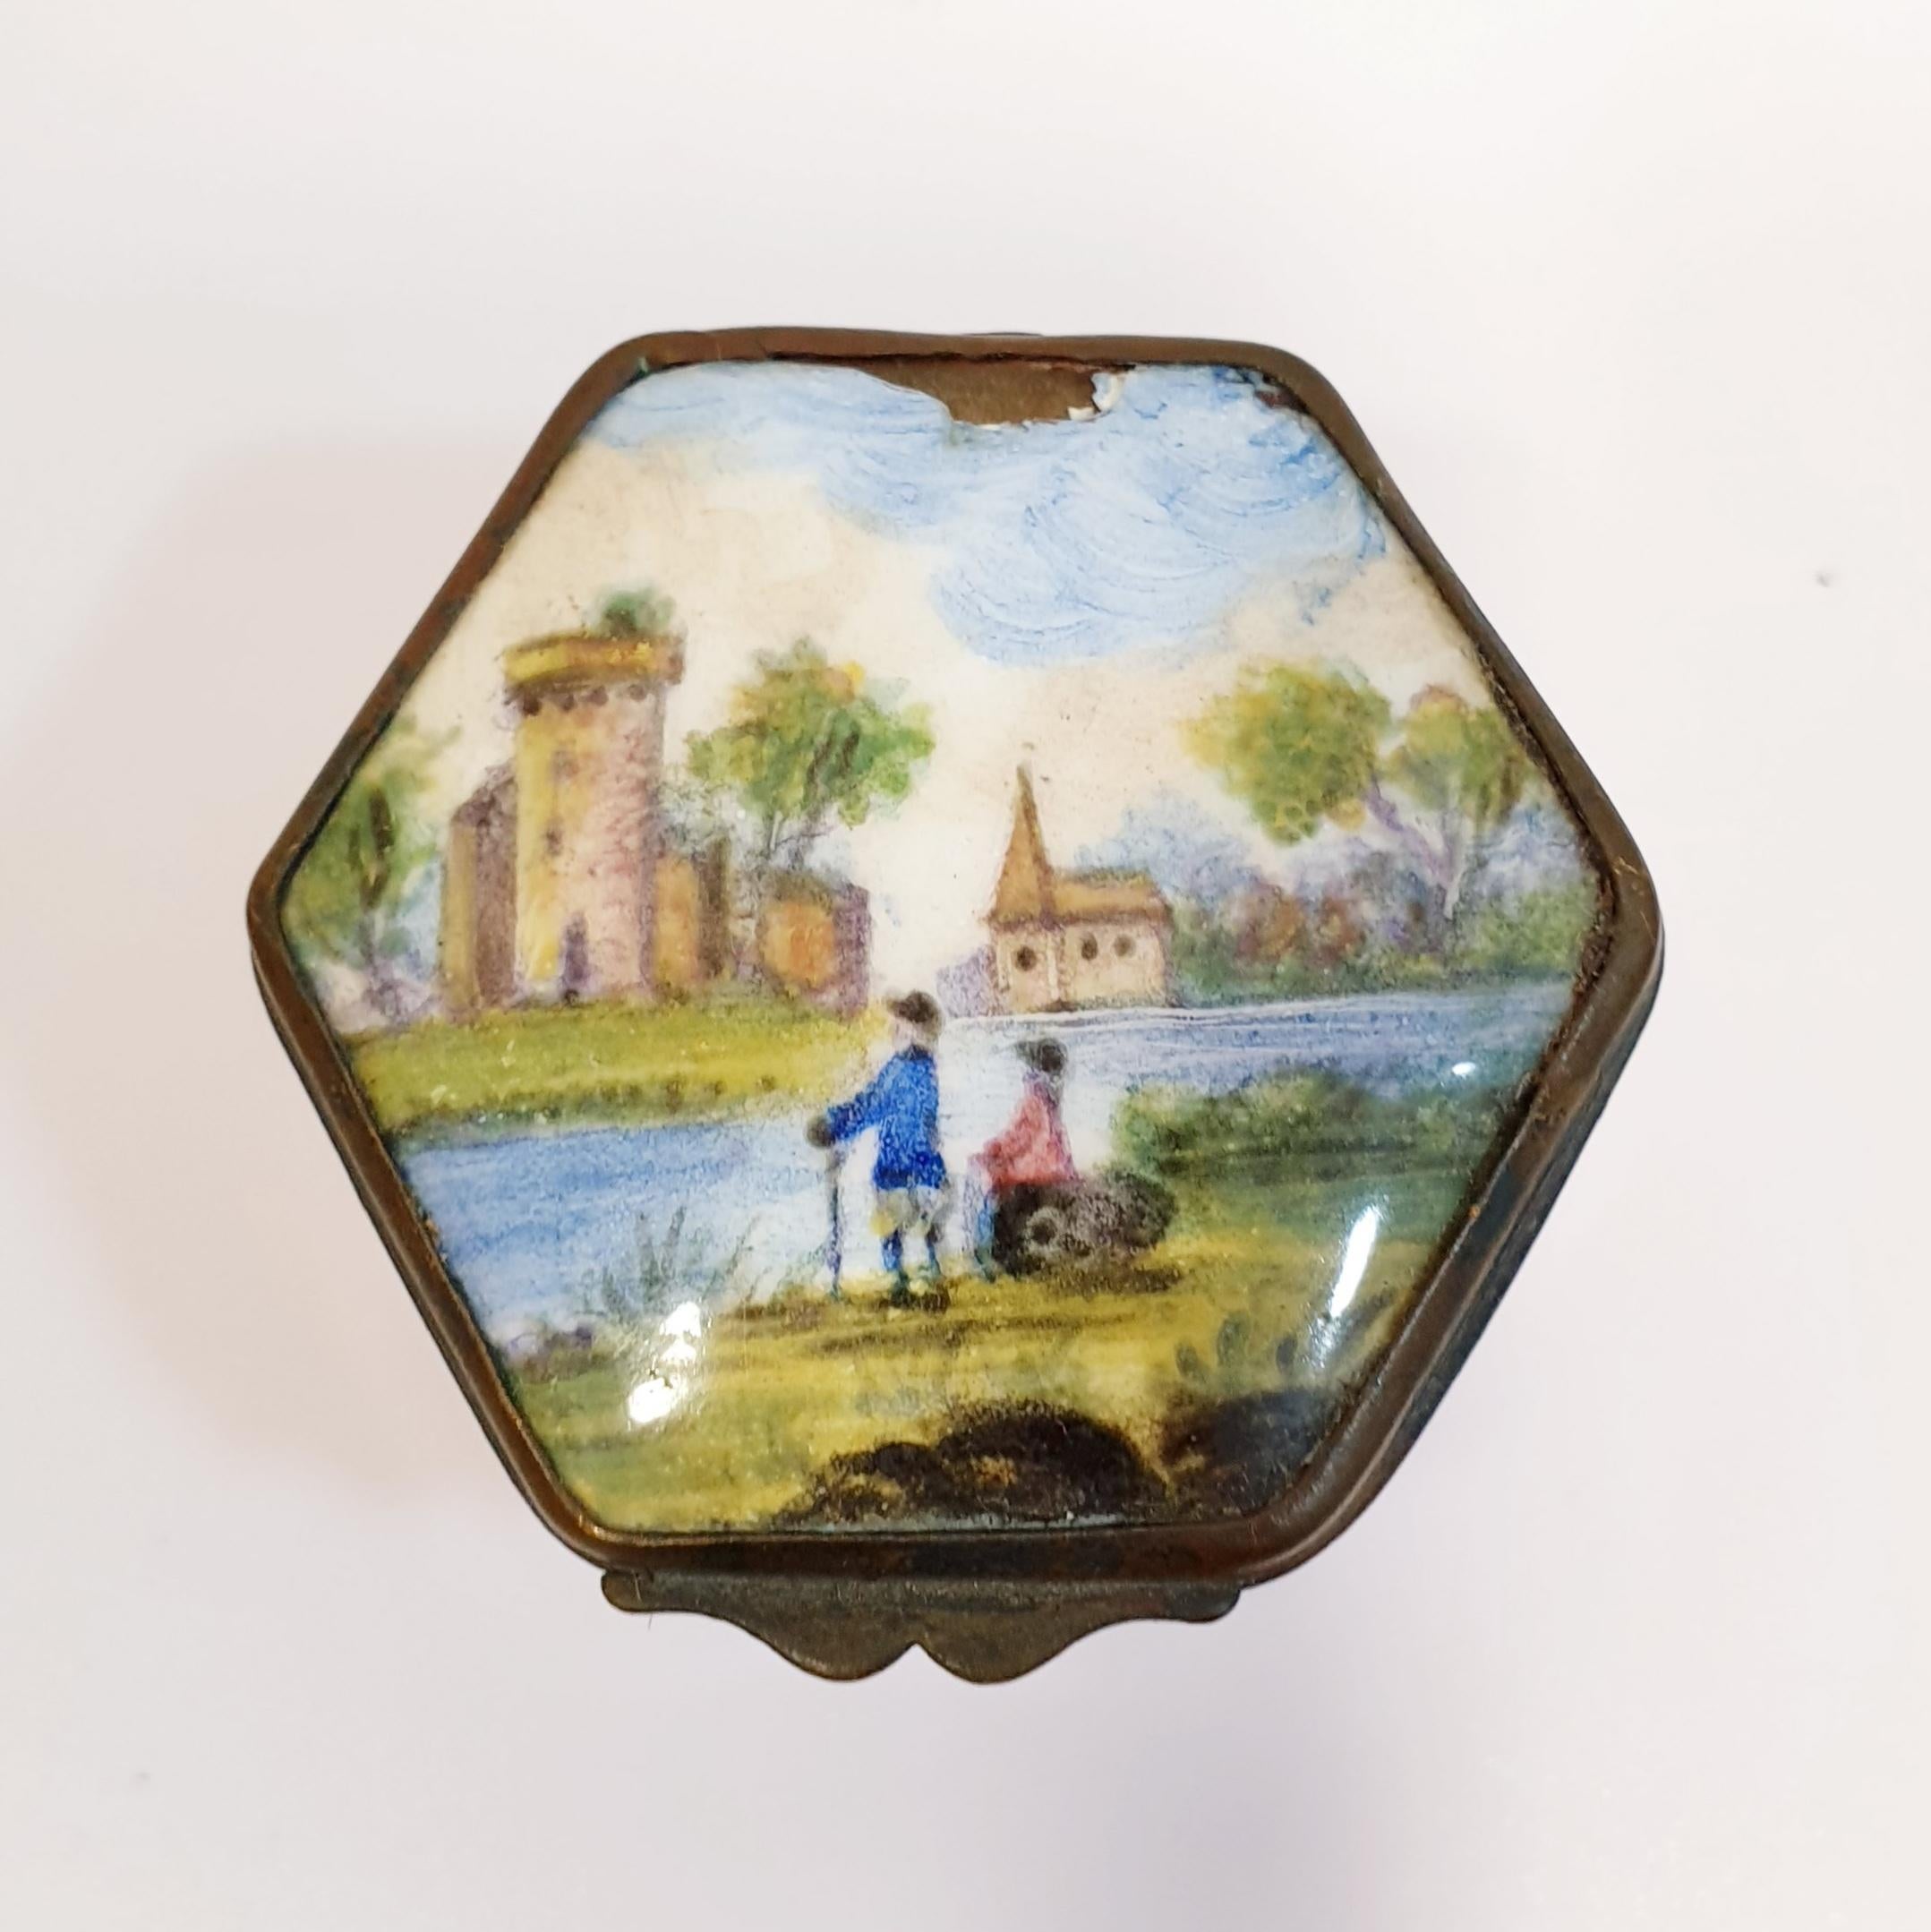 Antique 19th hand painted pink porcelain box with promenade scene
Perfect gift for decoration or keeping personal and valuable items

PRADERA is a second generation of a family run business jewelers of reference in Spain, with a rich track record